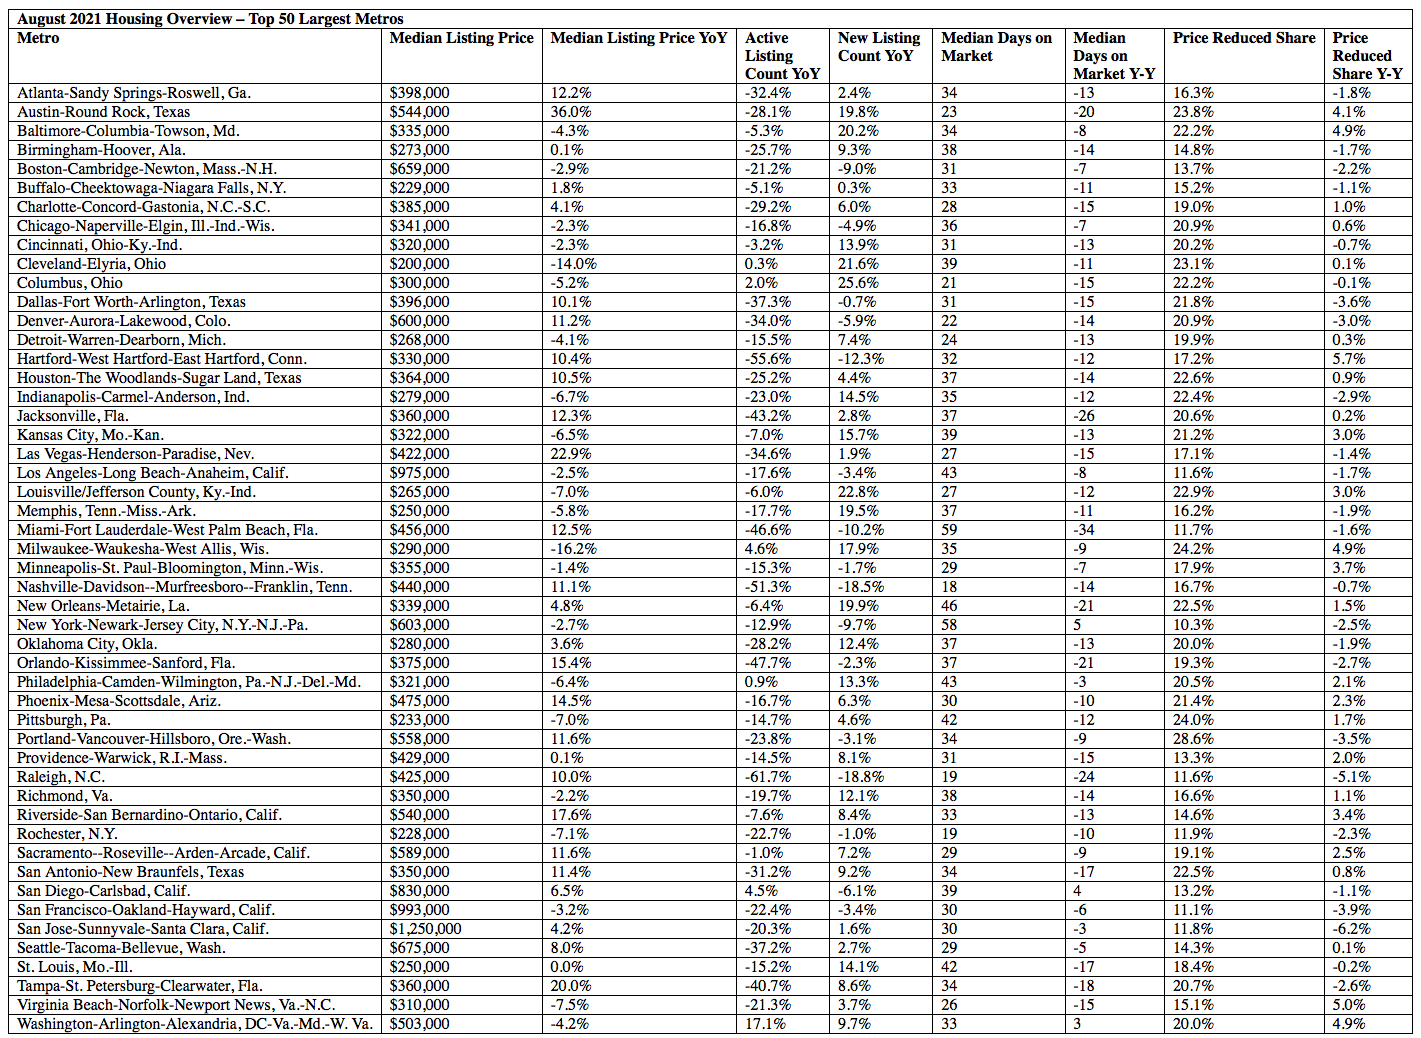 August 2021 housing overview of 50 largest metros